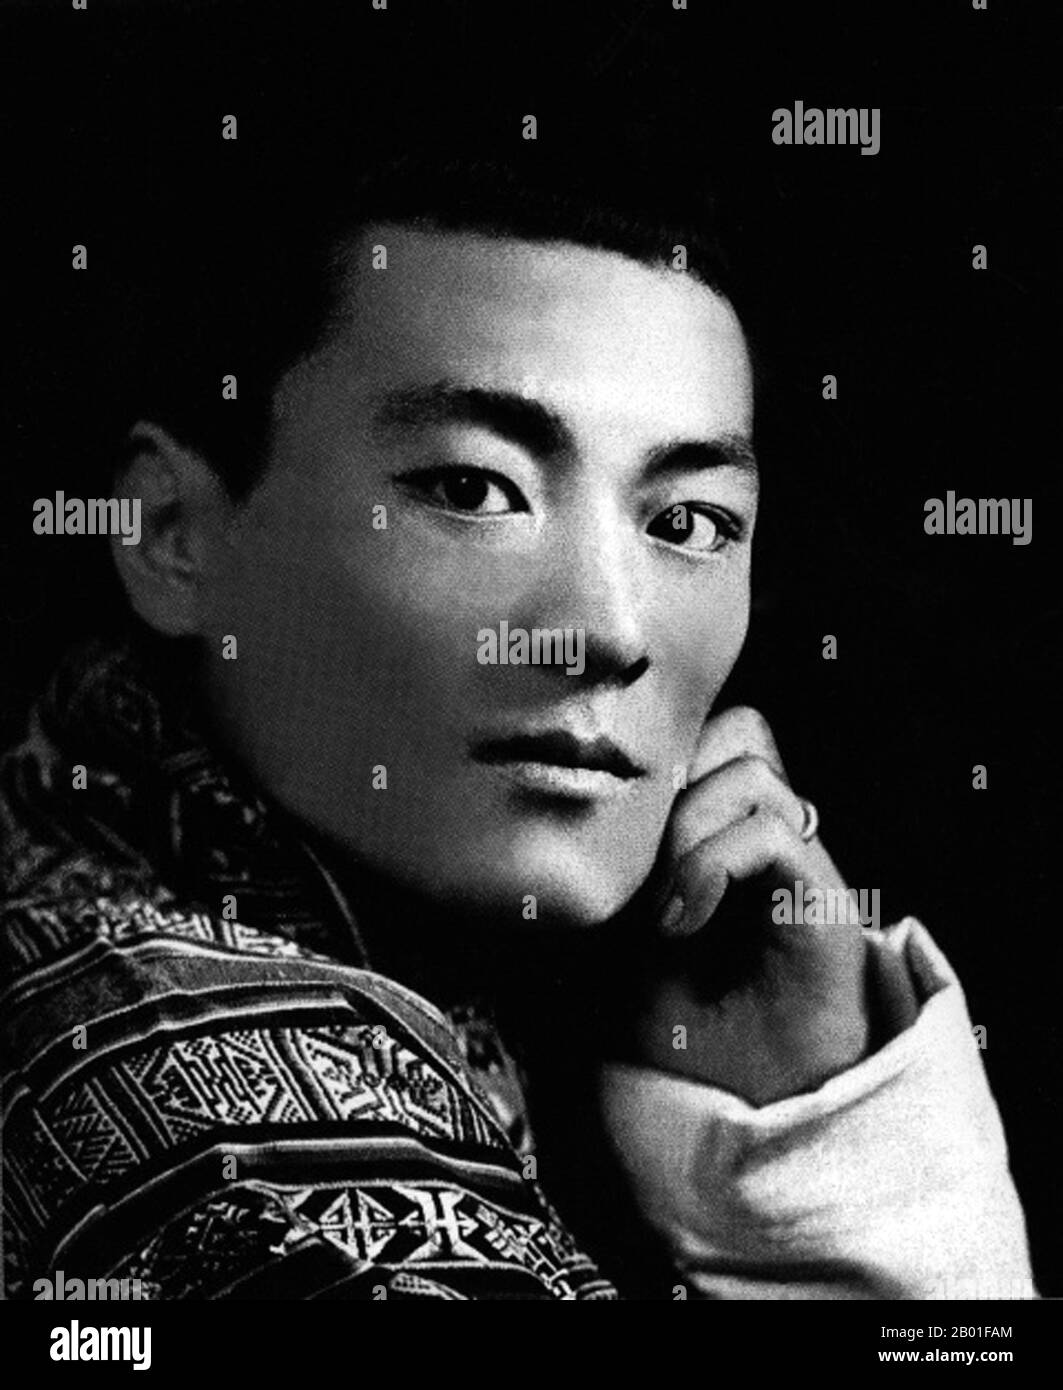 Bhutan: His Majesty Jigme Dorji Wangchuck (2 May 1928 - 21 July 1972), 3rd Druk Gyalpo or 'Dragon King' (r. 1952-1972), c. 1950s.  Jigme Dorji Wangchuck was the 3rd Druk Gyalpo of Bhutan, ascending to the throne in 1952. His primary goal during his reign was opening Bhutan to the outside world and modernising it, deepening ties with India and developing a close economic relationship with Bangladesh, Bhutan being the second nation after India to recognise Bangladesh's independence. Bhutan also joined the United Nations in 1971 under his rule. Stock Photo